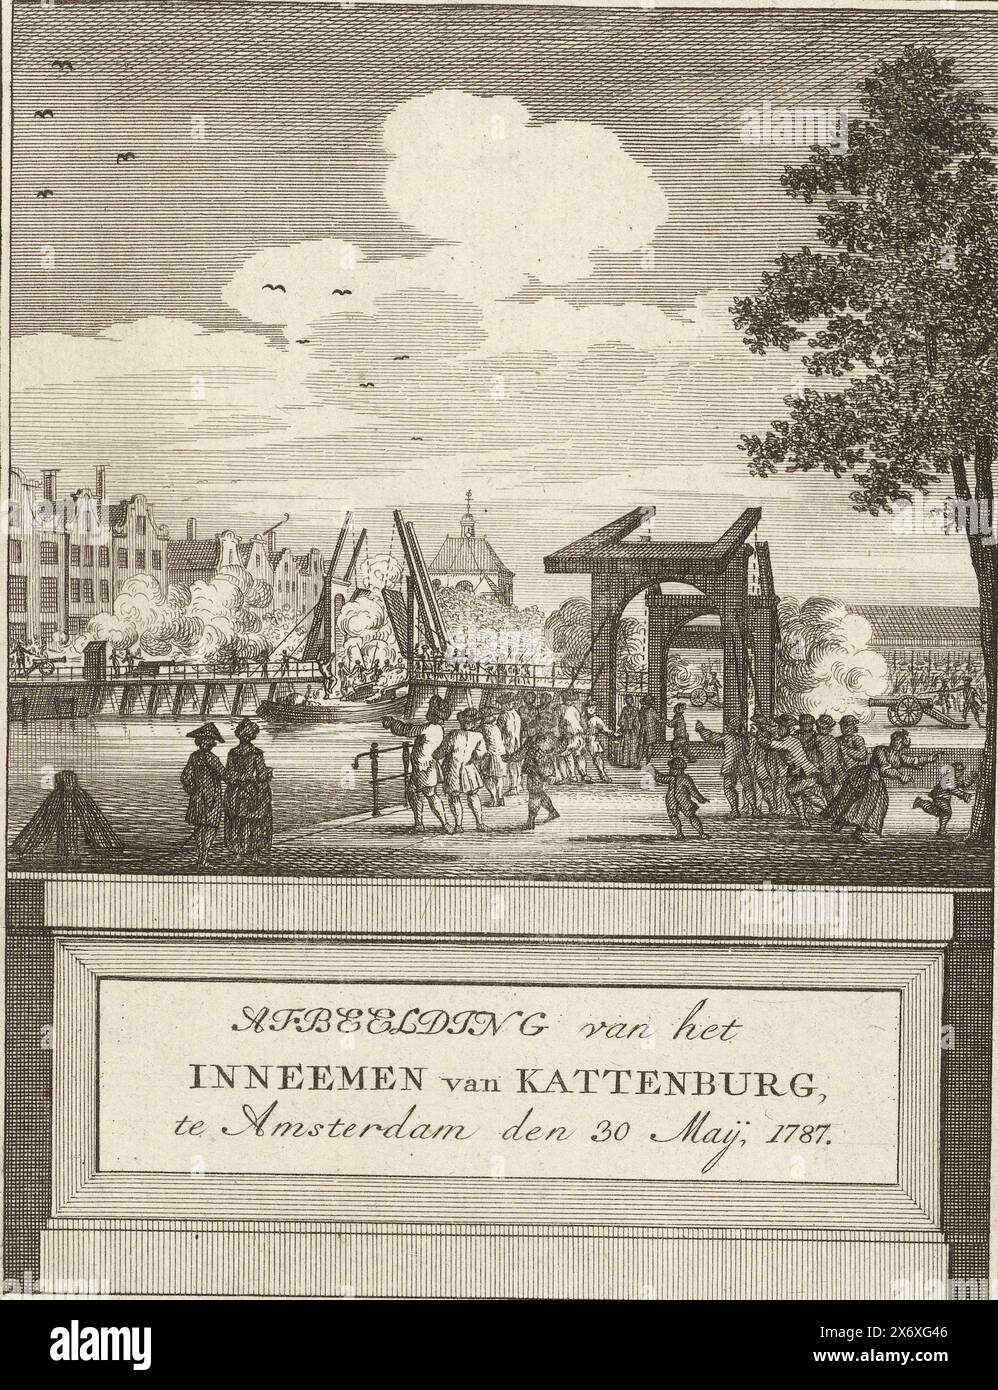 Conquest of the Kattenburger Bridge, 1787, Image of the Capture of Kattenburg, in Amsterdam on the 30th of May, 1787 (title on object), The capture of the Kattenburger Bridge to the island of Kattenburg from the rebellious Orangists by armed Amsterdam citizens, May 30, 1787. Marked at the top: In the Mercurius, August 1787. First piece. Page 40., print, print maker: anonymous, publisher: Bernardus Mourik, (mentioned on object), Northern Netherlands, 1787, paper, etching, engraving, height, 177 mm × width, 136 mm Stock Photo